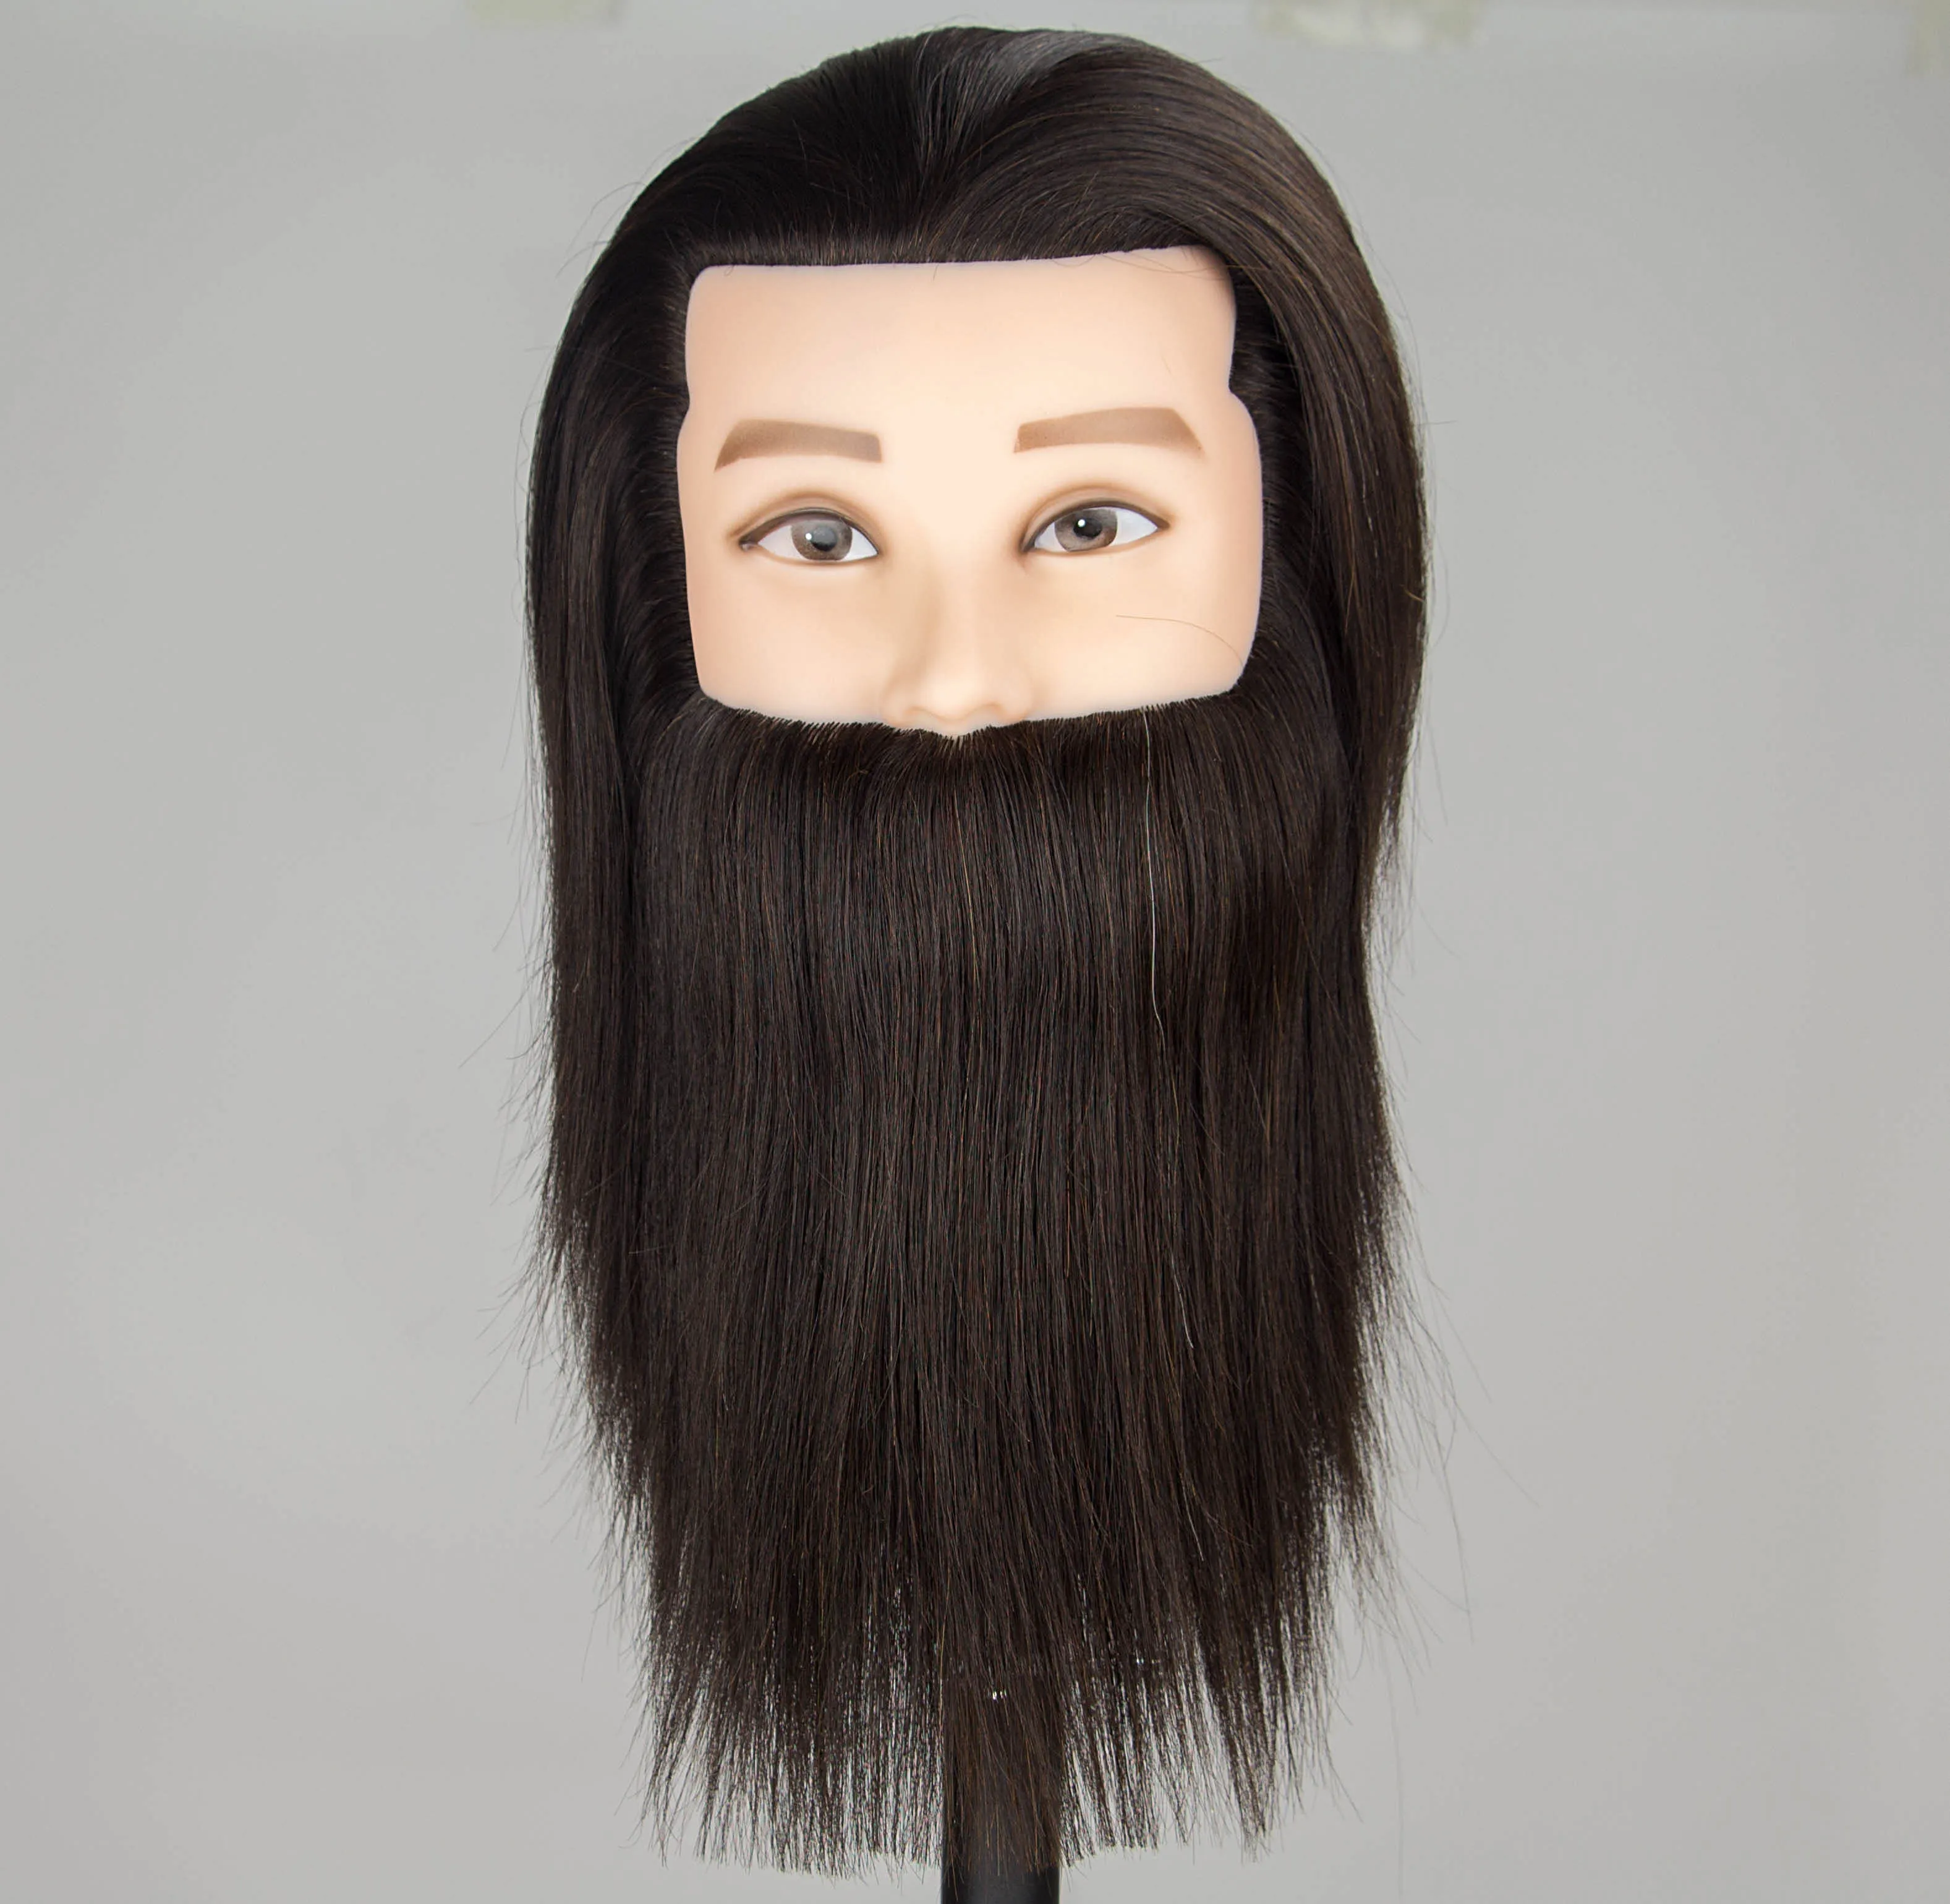 Realistic Male Cheap Styrofoam Wig Heads With Beard For Hair Training And  Beauty School From Fengyuanfzp, $75.37